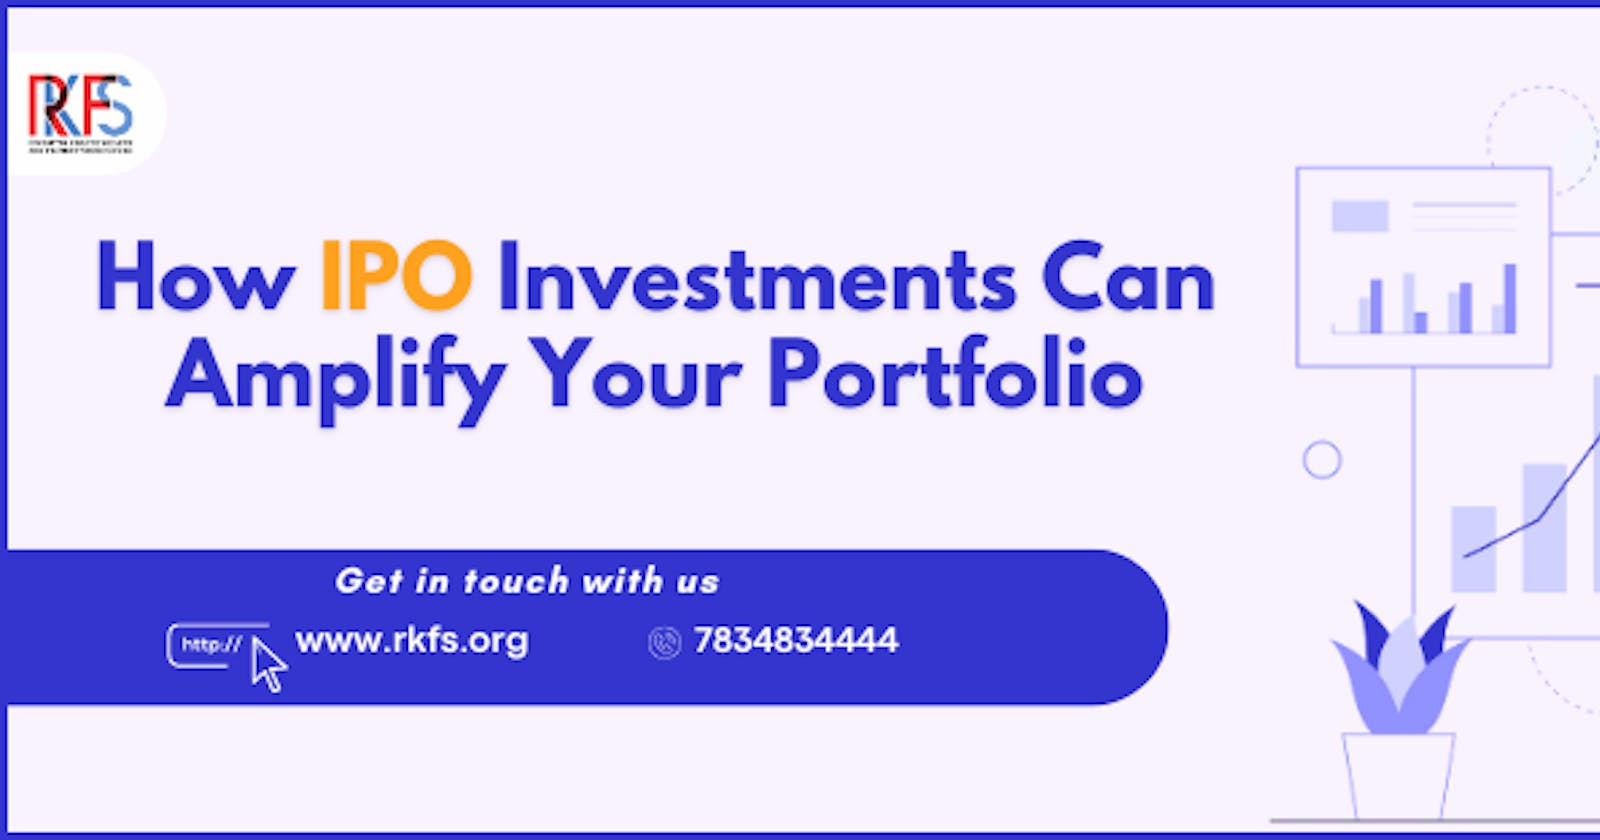 How IPO Investments Can Amplify Your Portfolio